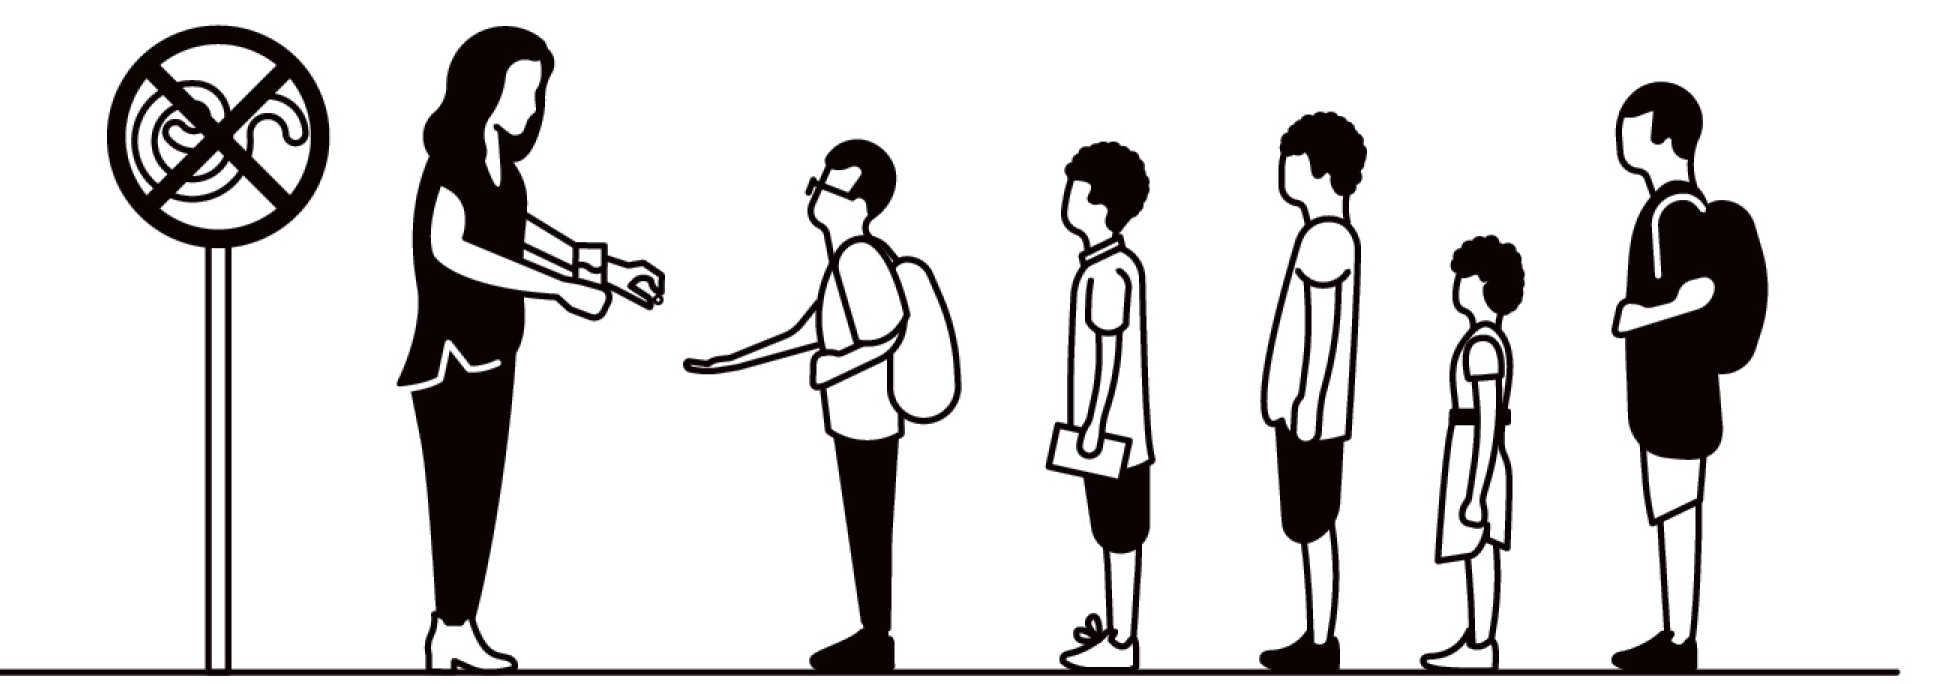 An illustration showing a woman handing a vaccination tablet to a child and four more children waiting behind in a queue.